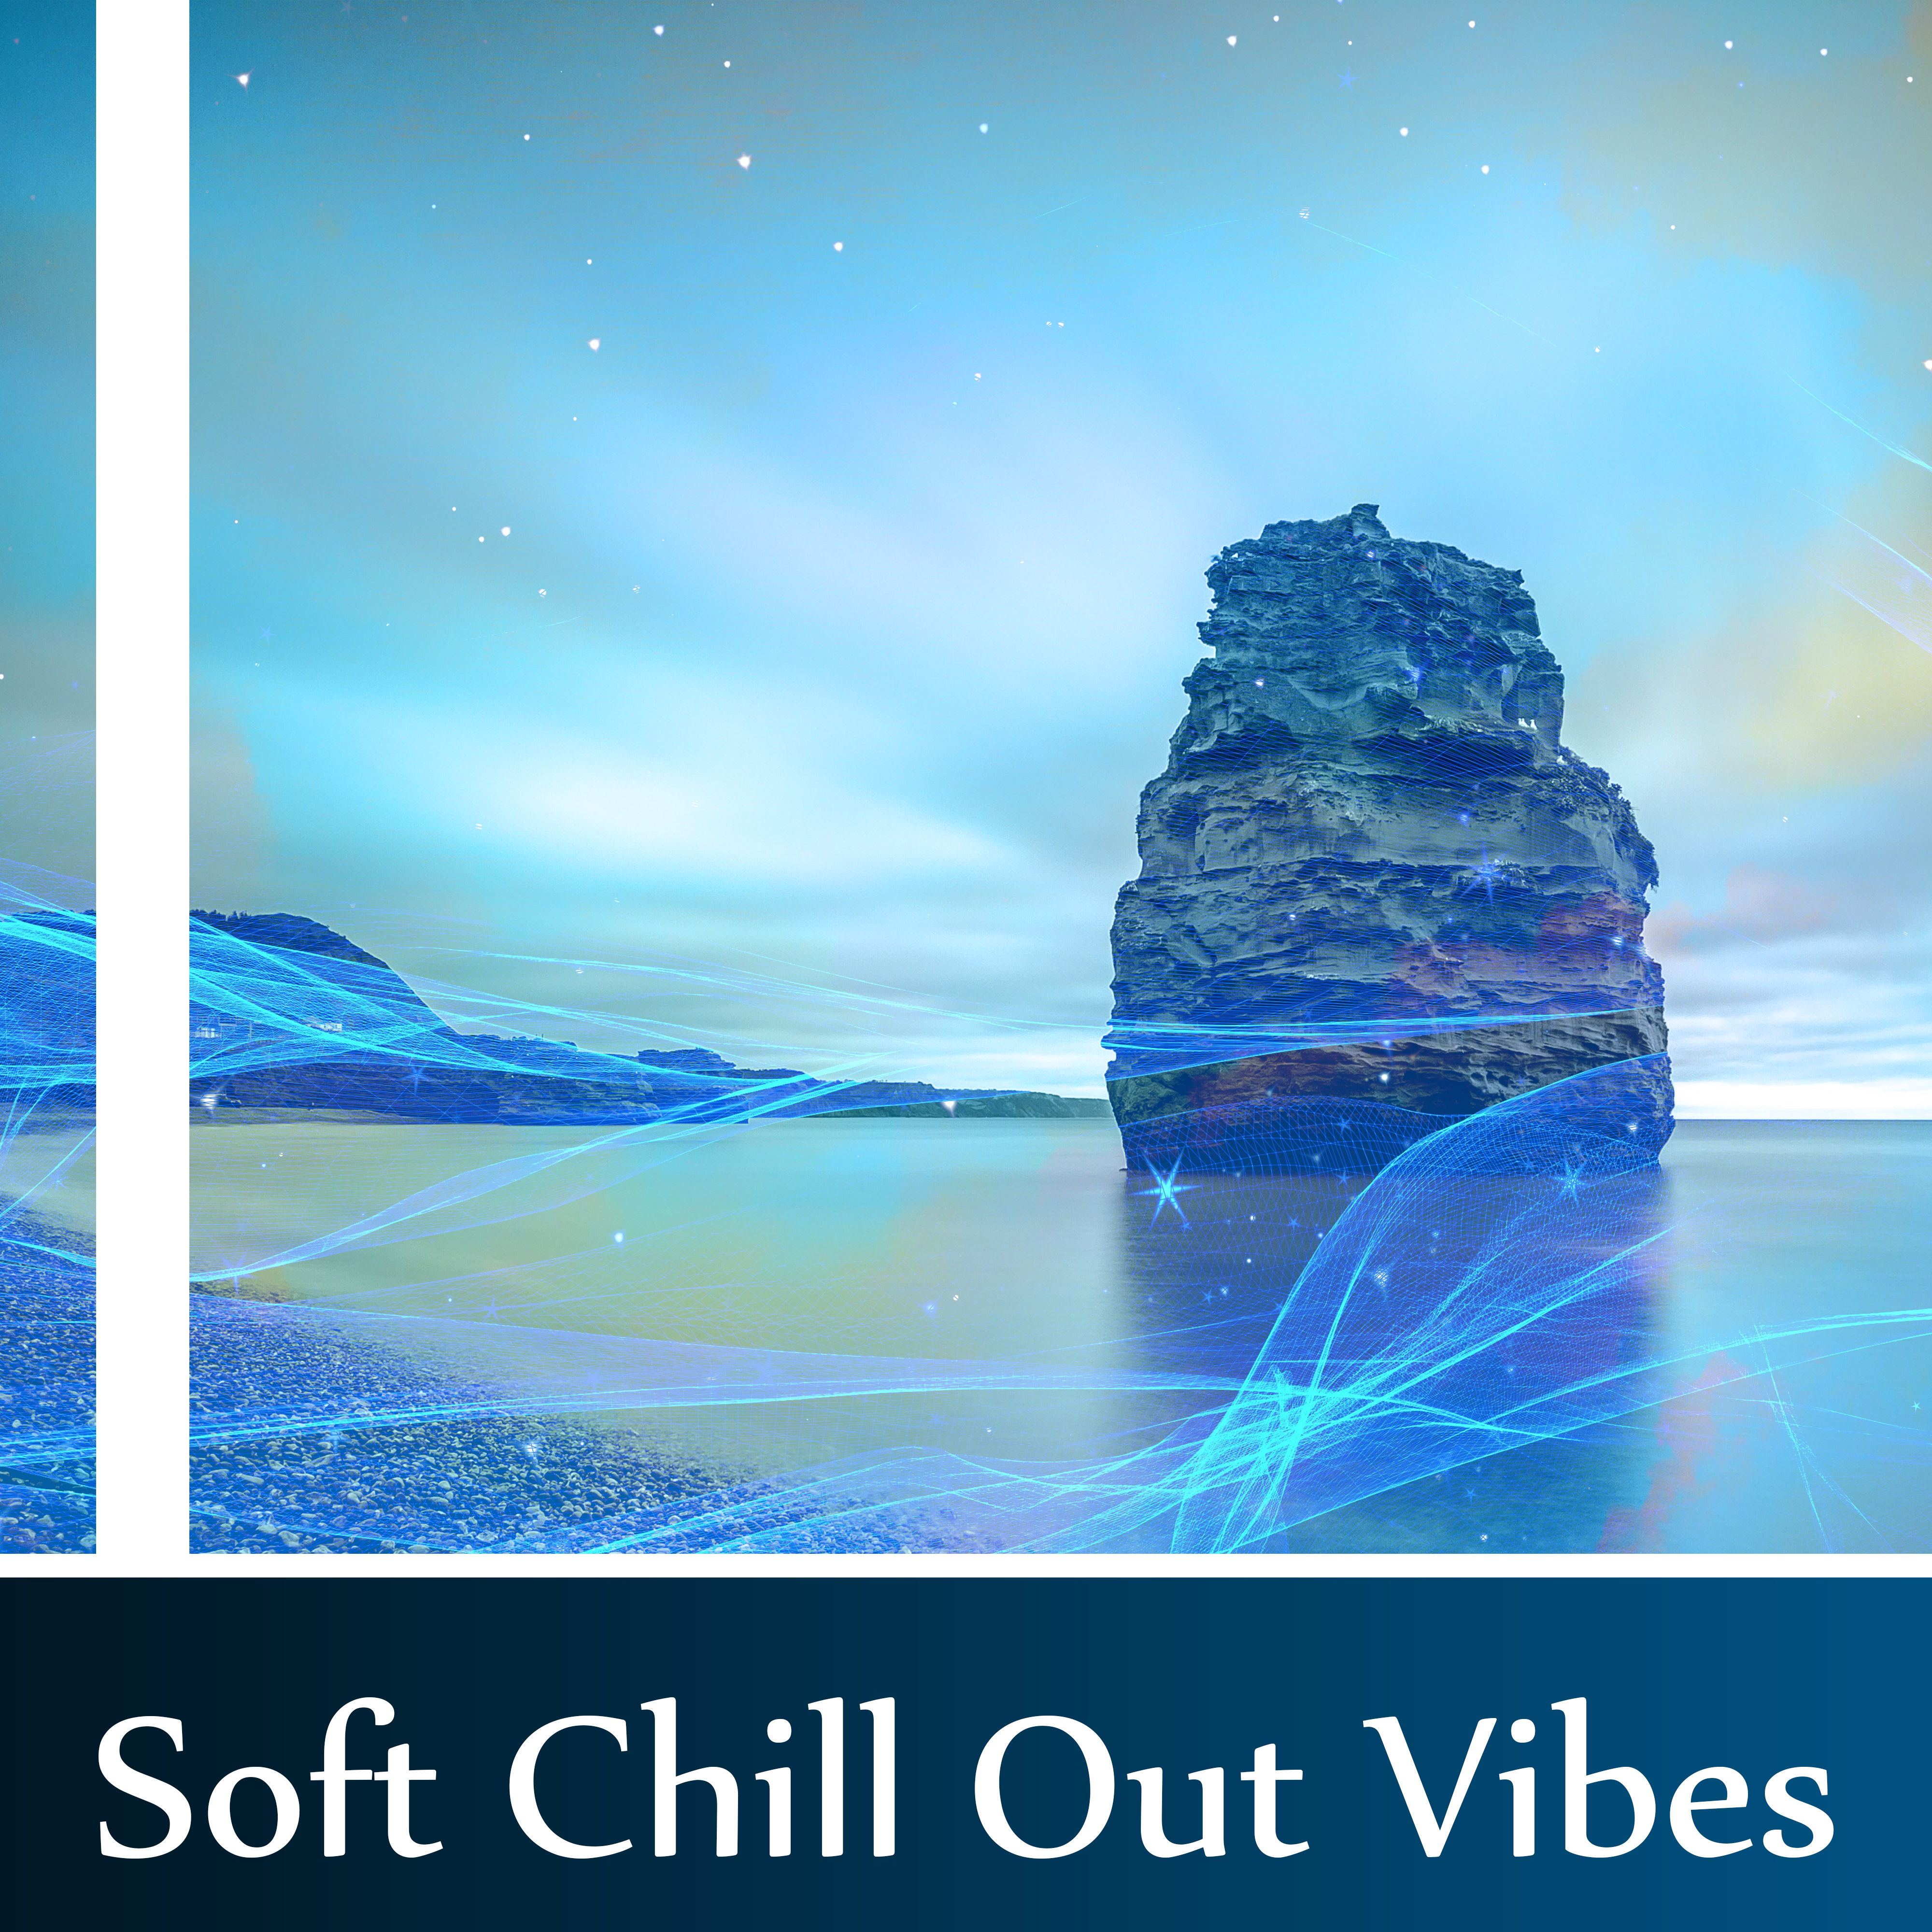 Soft Chill Out Vibes  Relaxing Summer, Holiday on Tropical Island, Sunbath,  Easy Listening